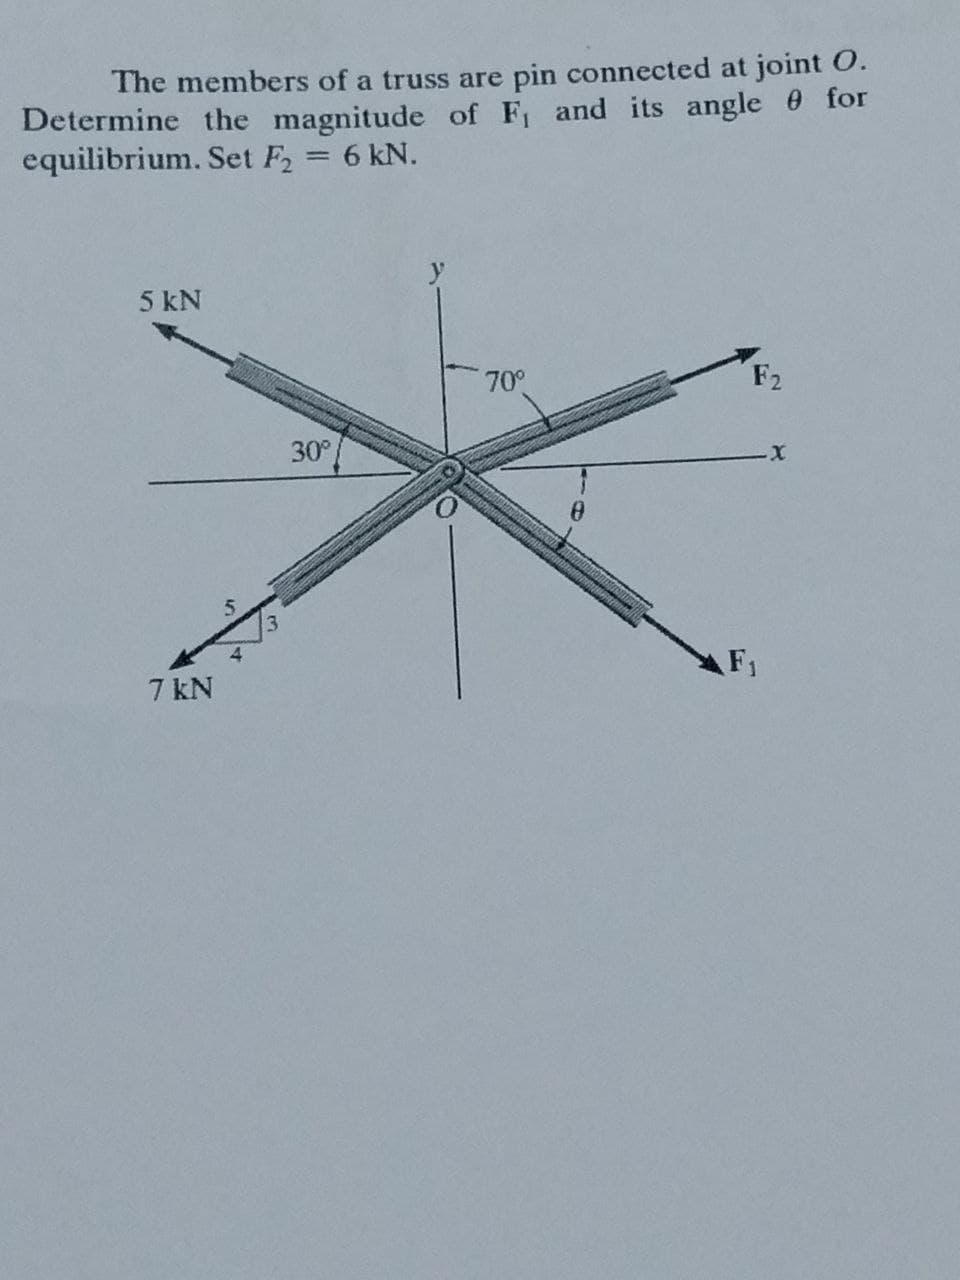 The members of a truss are pin connected at joint 0.
Determine the magnitude of F and its angle 0 for
equilibrium. Set F2 = 6 kN.
%3D
5 kN
70°
F2
30
F1
7 kN
